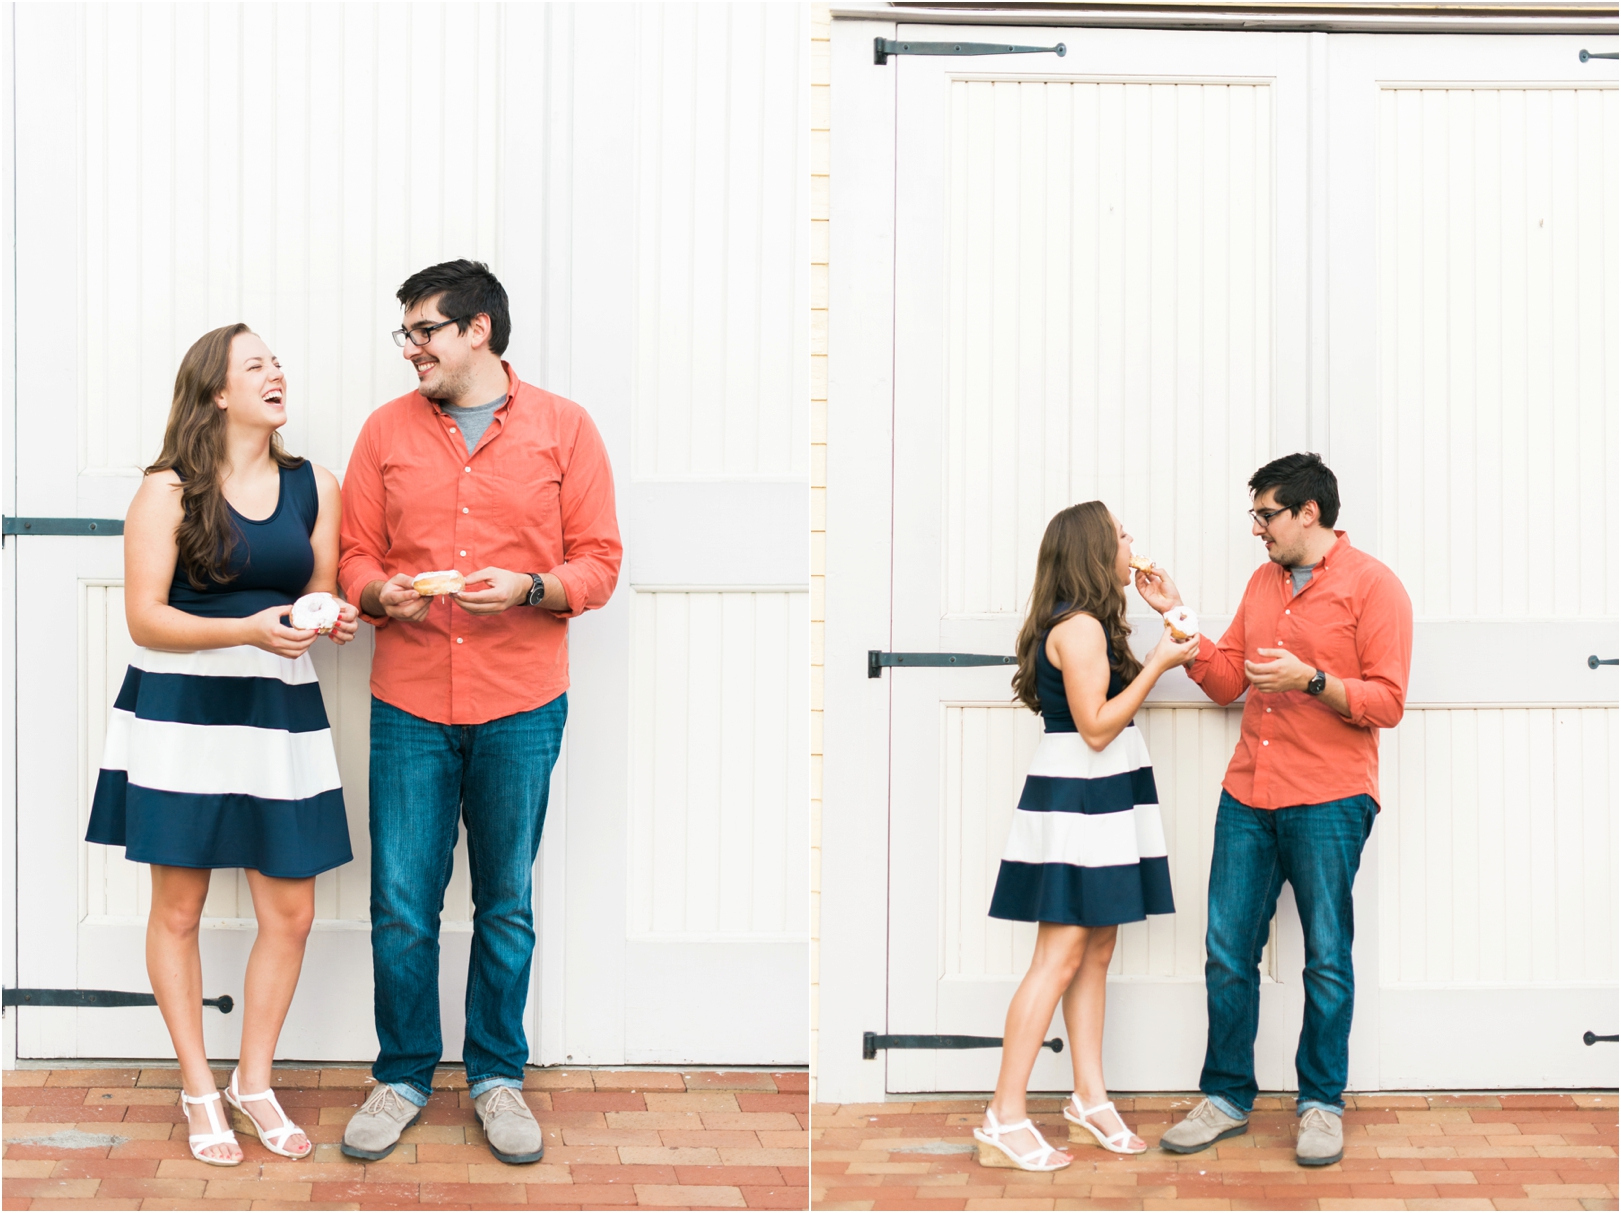 old-mill-bakery-cafe-engagement-photos-joy-michelle